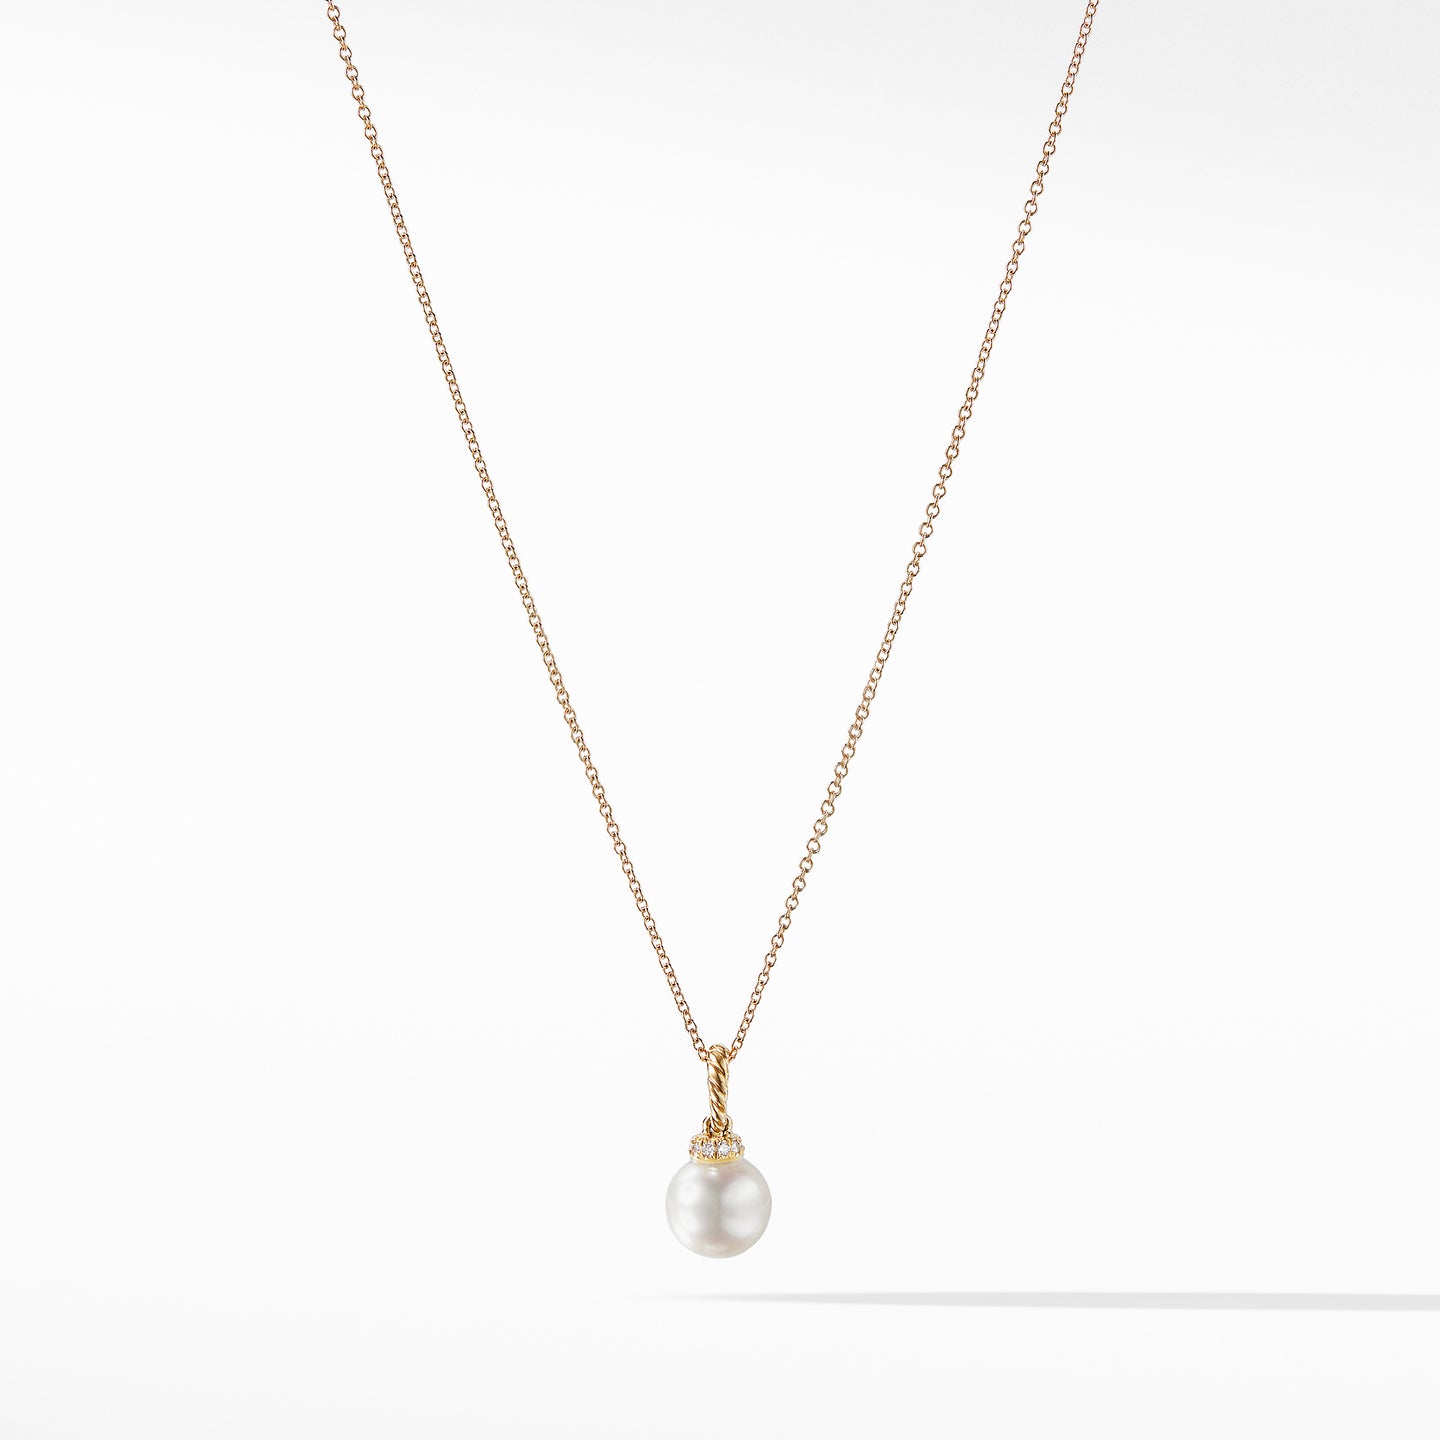 Pendant Necklace with Pearls and Diamonds in 18K Gold, 18